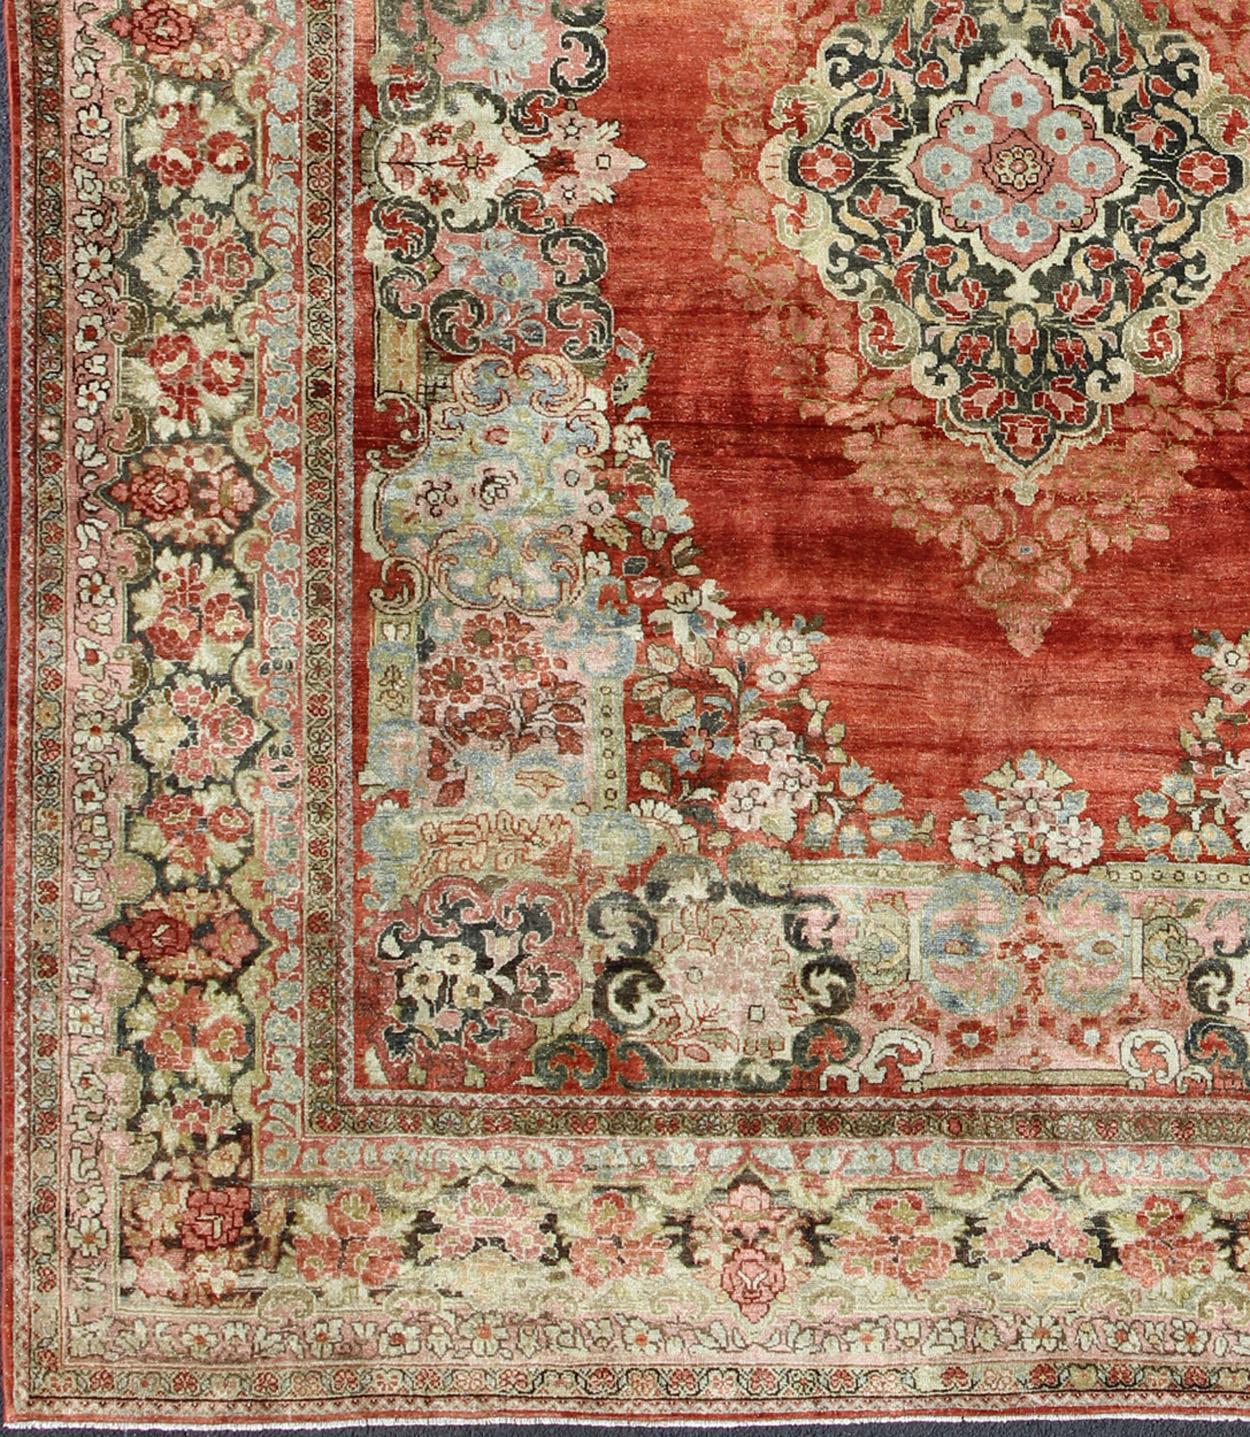  Persian Antique Mahal Rug with Beautiful Floral Design in Red, Pink, and Green. Keivan Woven Arts /  rug M14-0408, country of origin / type: Iran / Mahal-Sultanabad, circa 1930
Measures: 10'11 x 13'10.
This Persian Mahal rug (circa 1930) relies